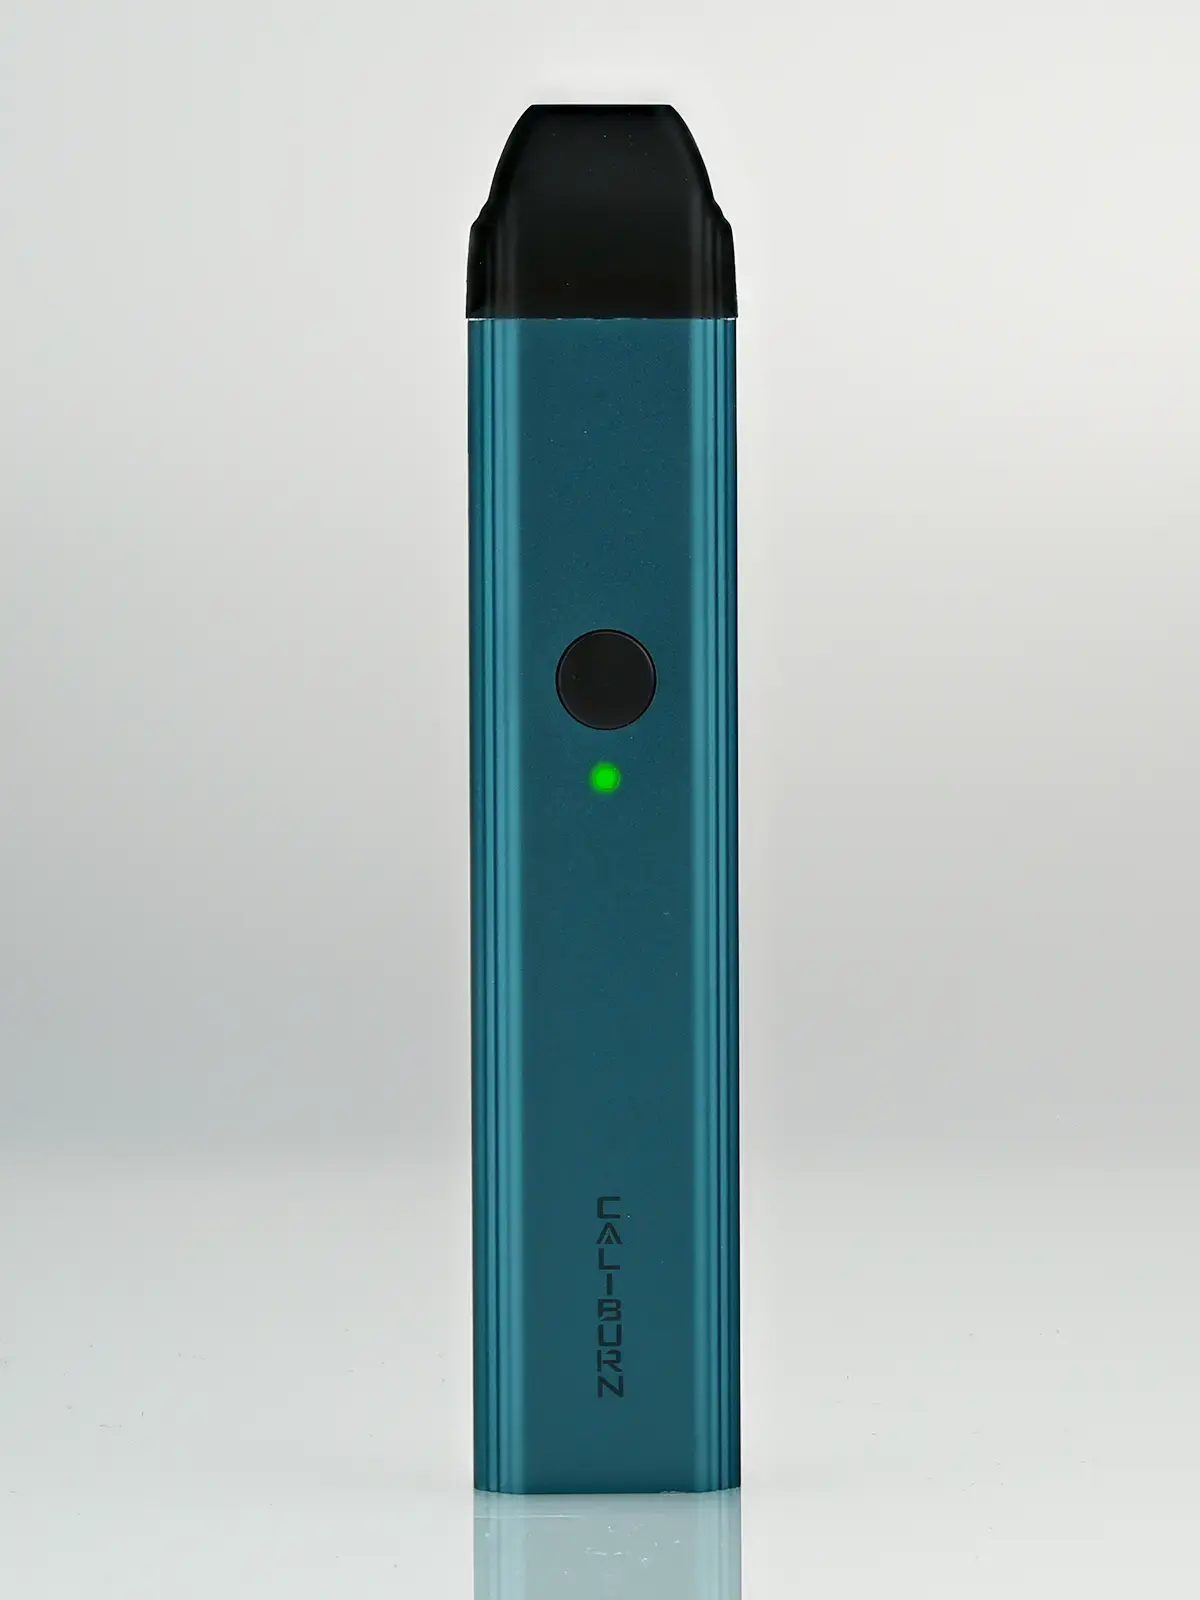 A front-facing Blue Caliburn device, standing in front of a white background